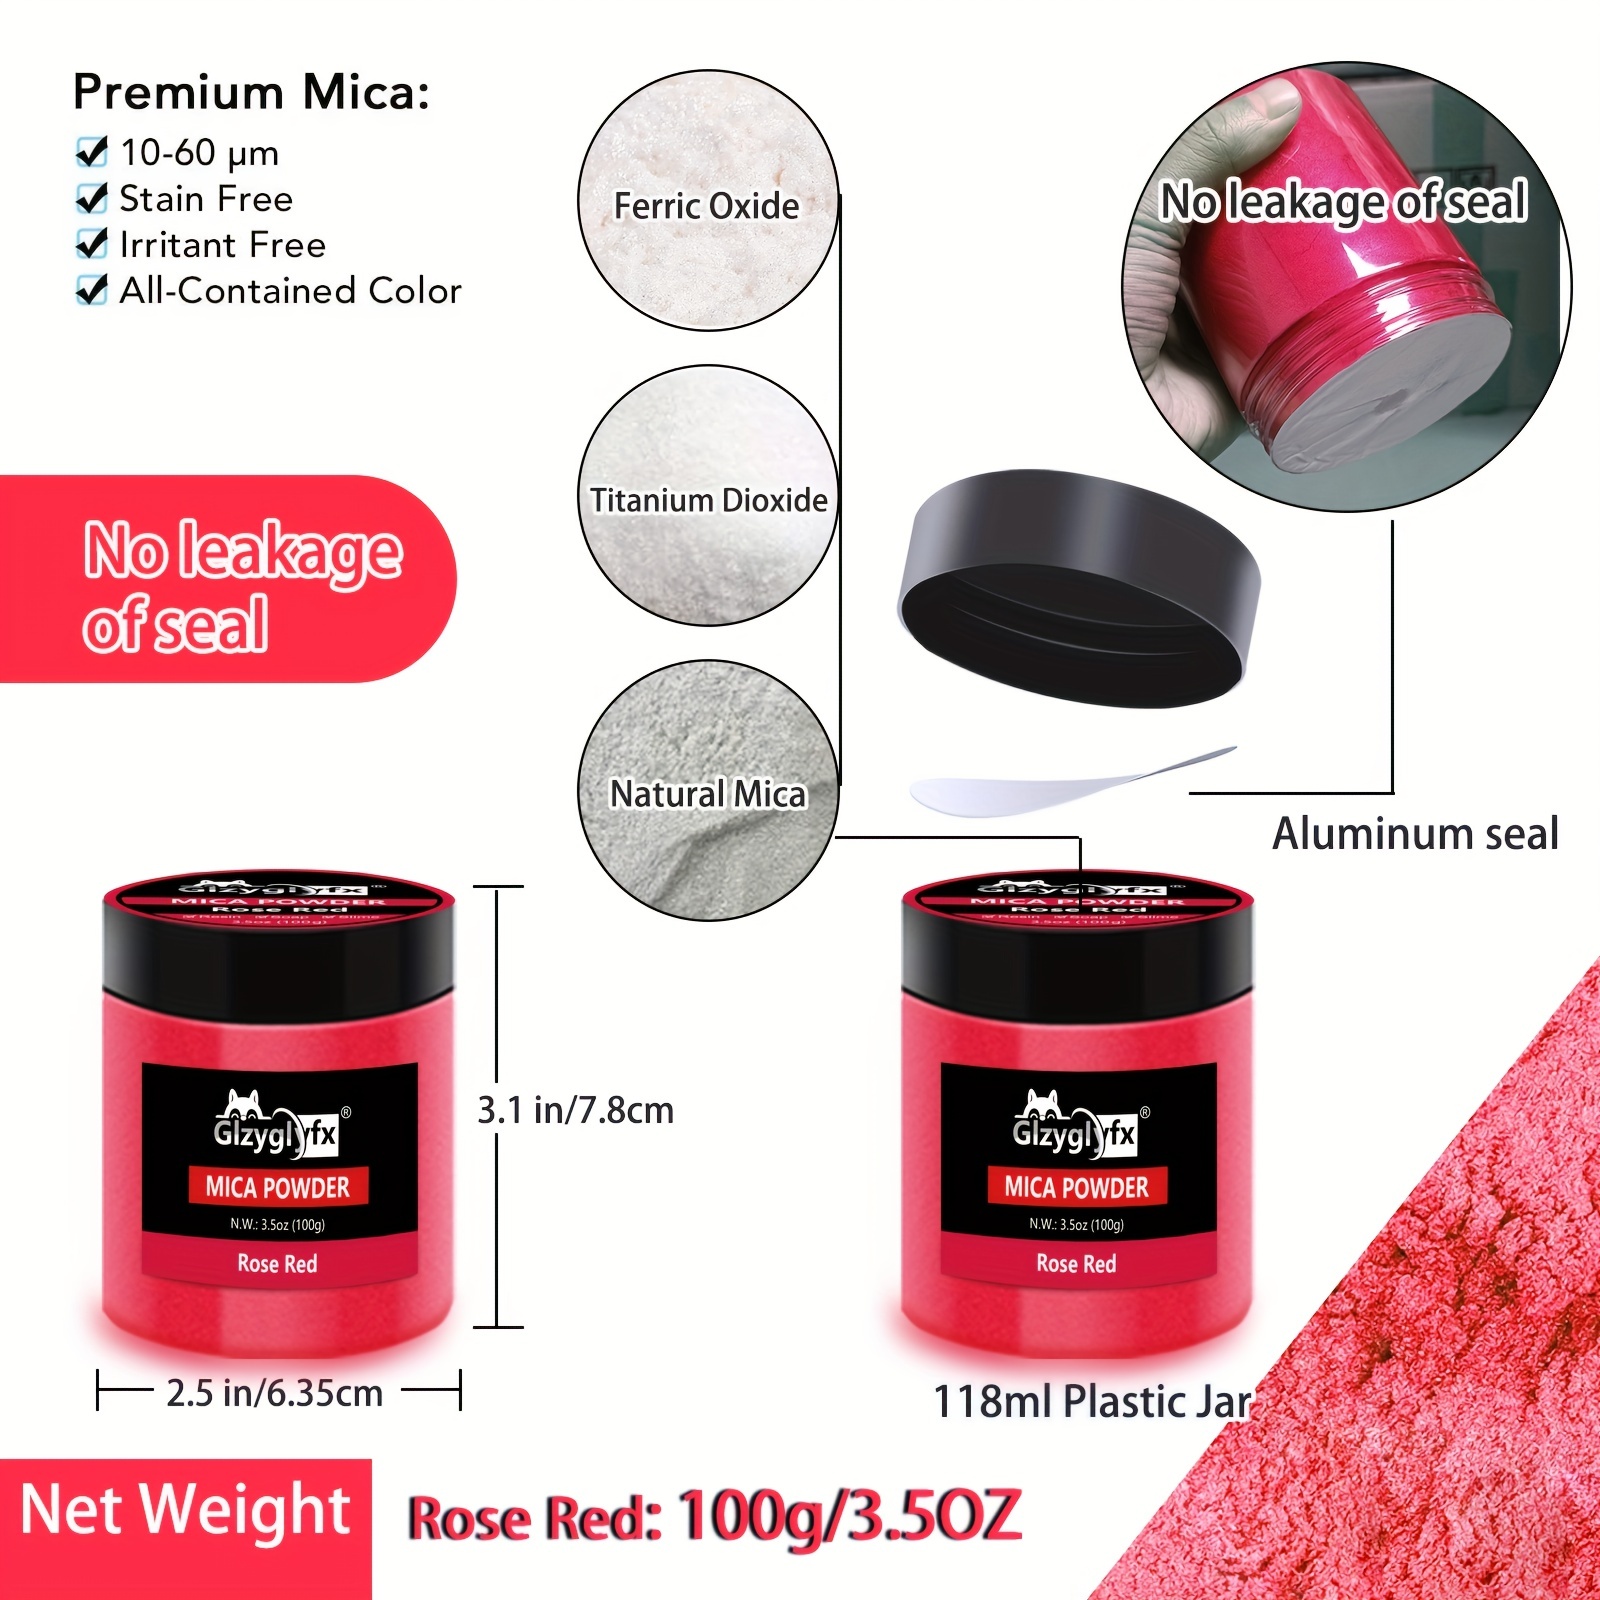 Stardust Micas - Pigment Powder for Resin, Epoxy Resin Pigment Powder